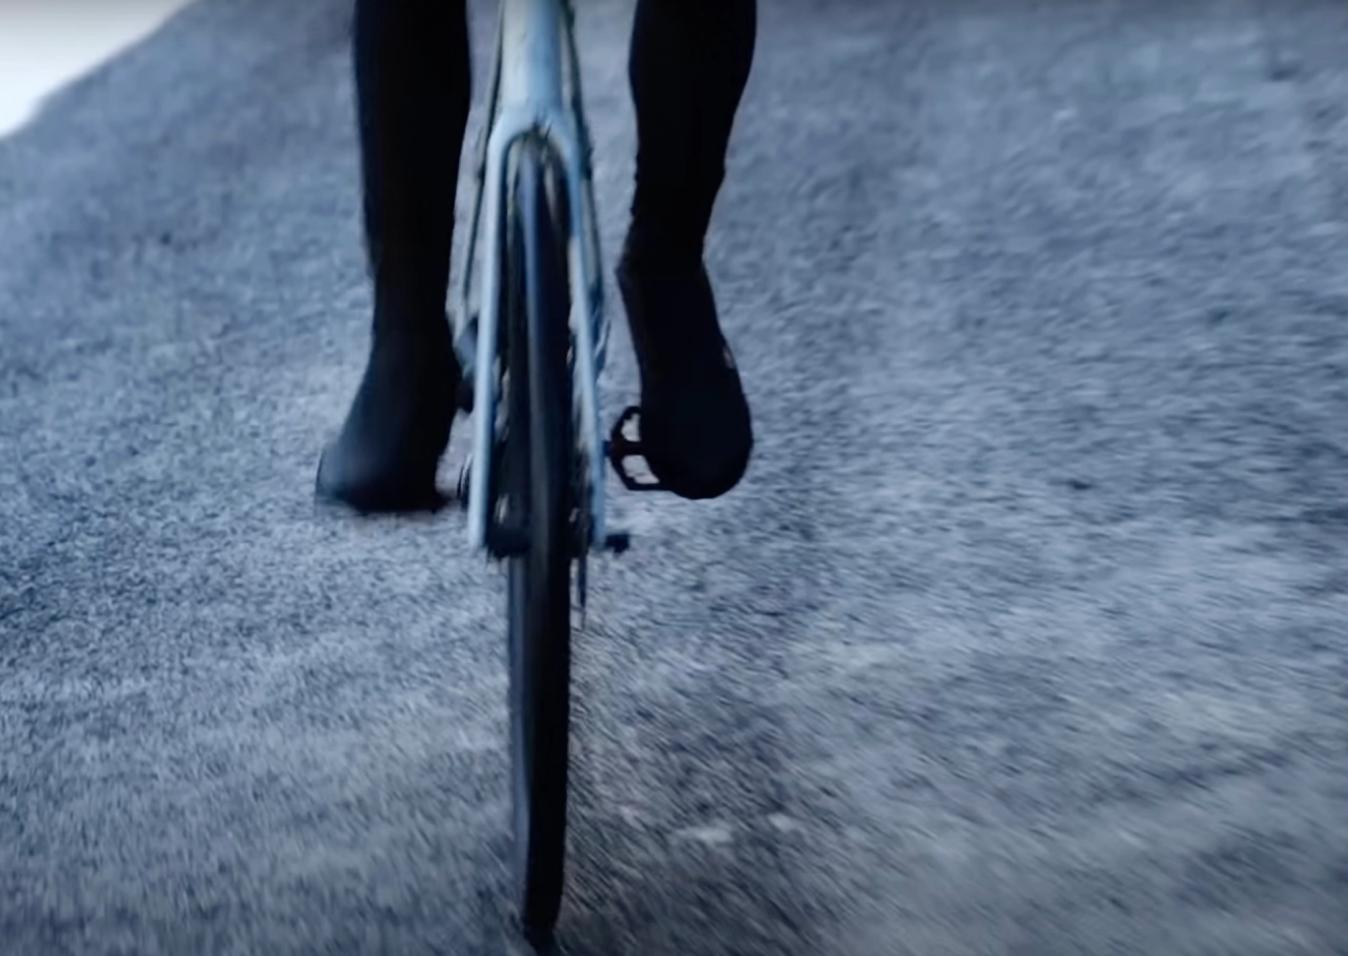 Flat pedals do not hold your feet in a fixed position meaning you can find yourself riding asymmetrically 